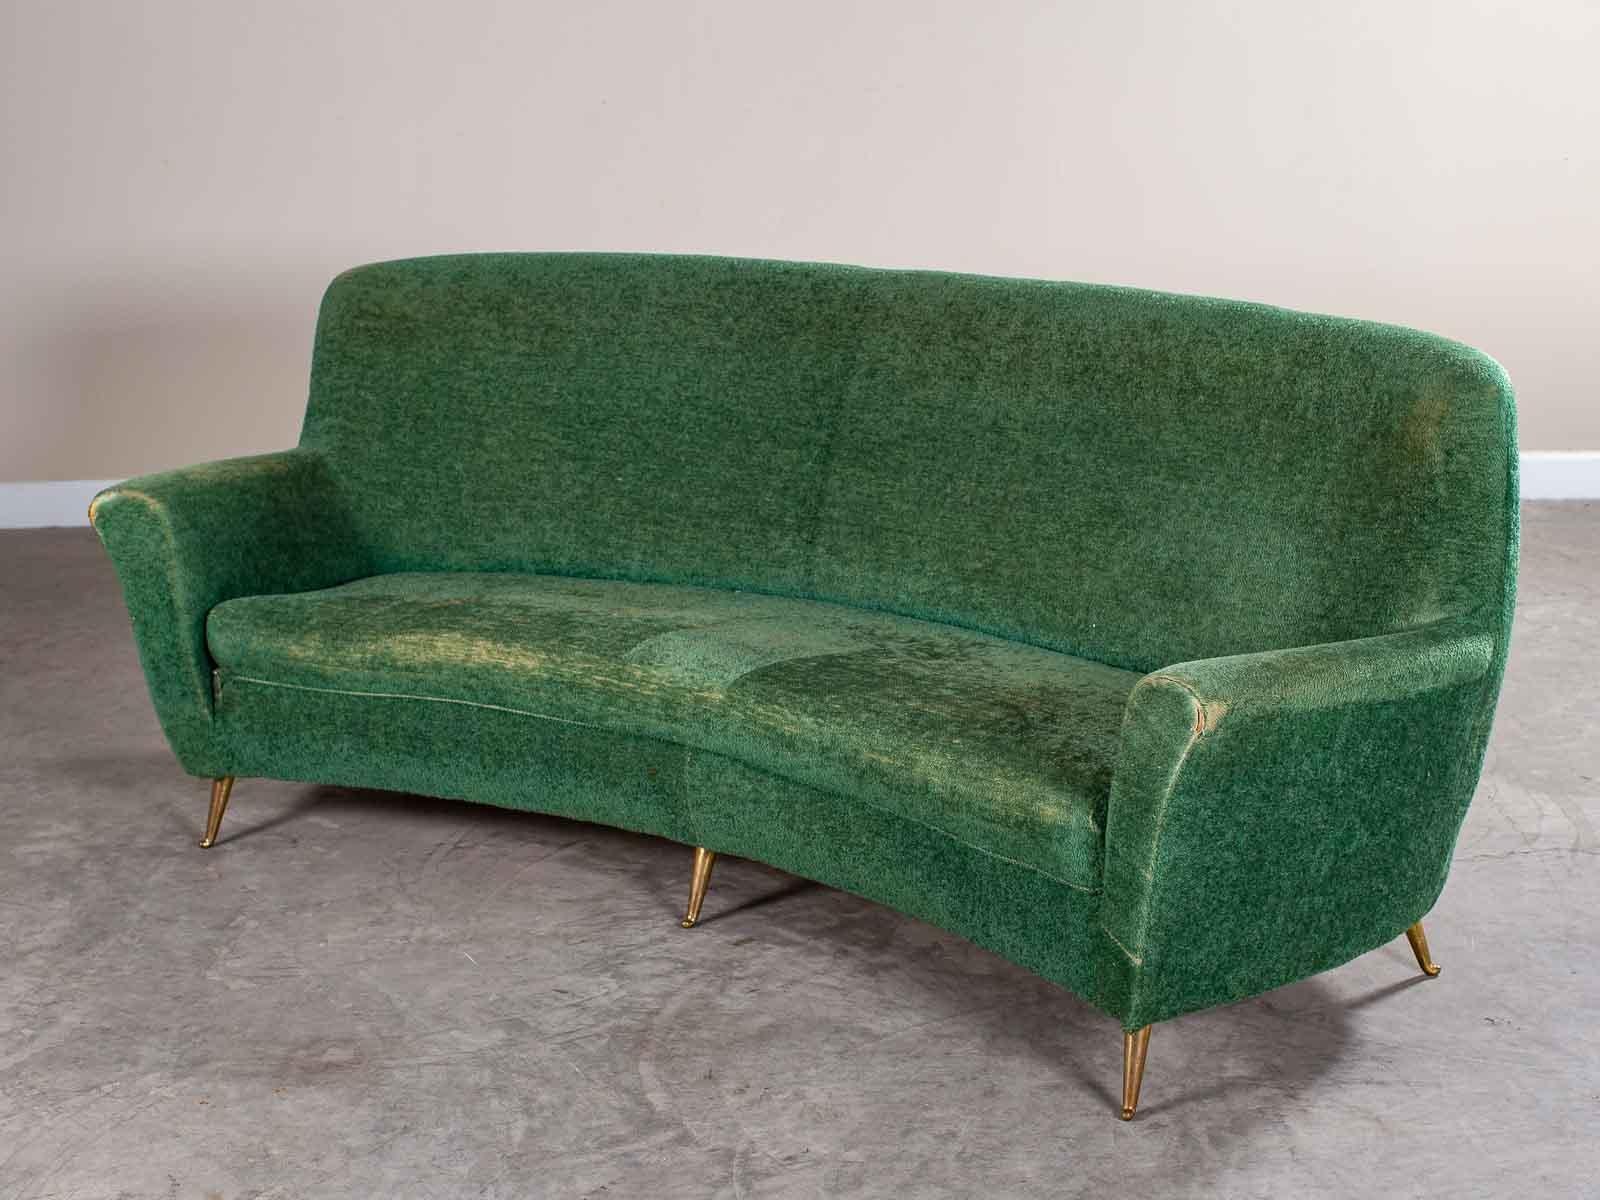 The well known Italian manufacturing firm ISA made this sofa with its distinctive curved shape. This exceptional vintage Italian sofa by ISA Bergamo has the original green upholstery. Please notice the unusual curved profile of the sofa with its